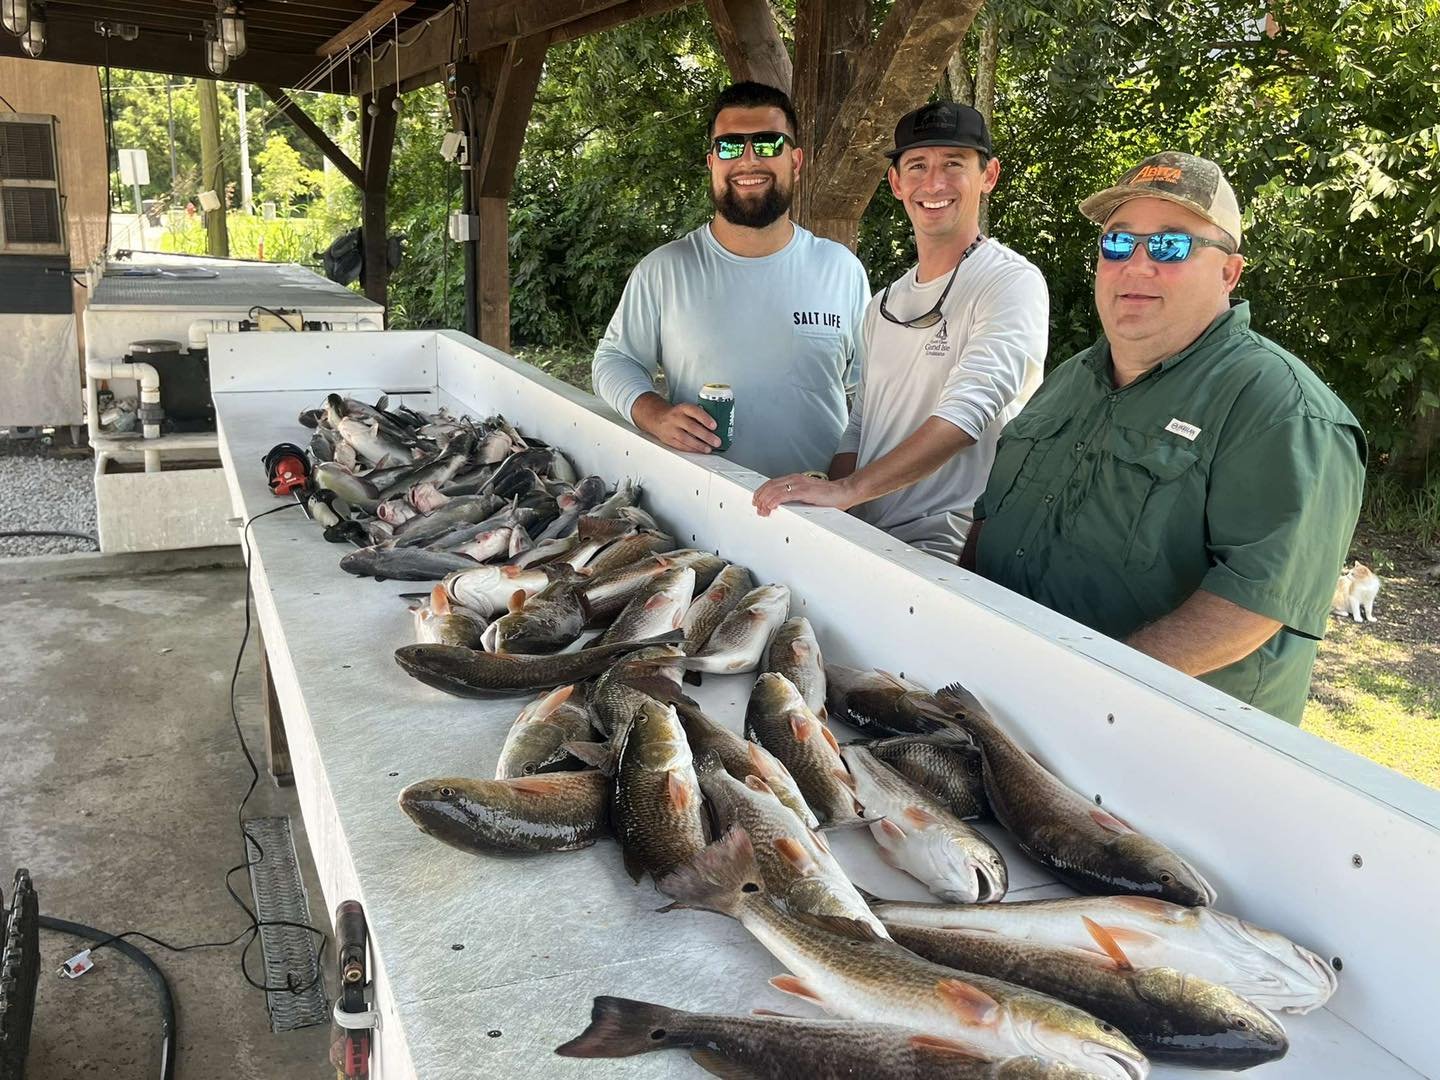 Had a great time on the water with Abita Lumber 🎣

Contact us about building your dream home! 

#luxuryhomebuilder #contractor